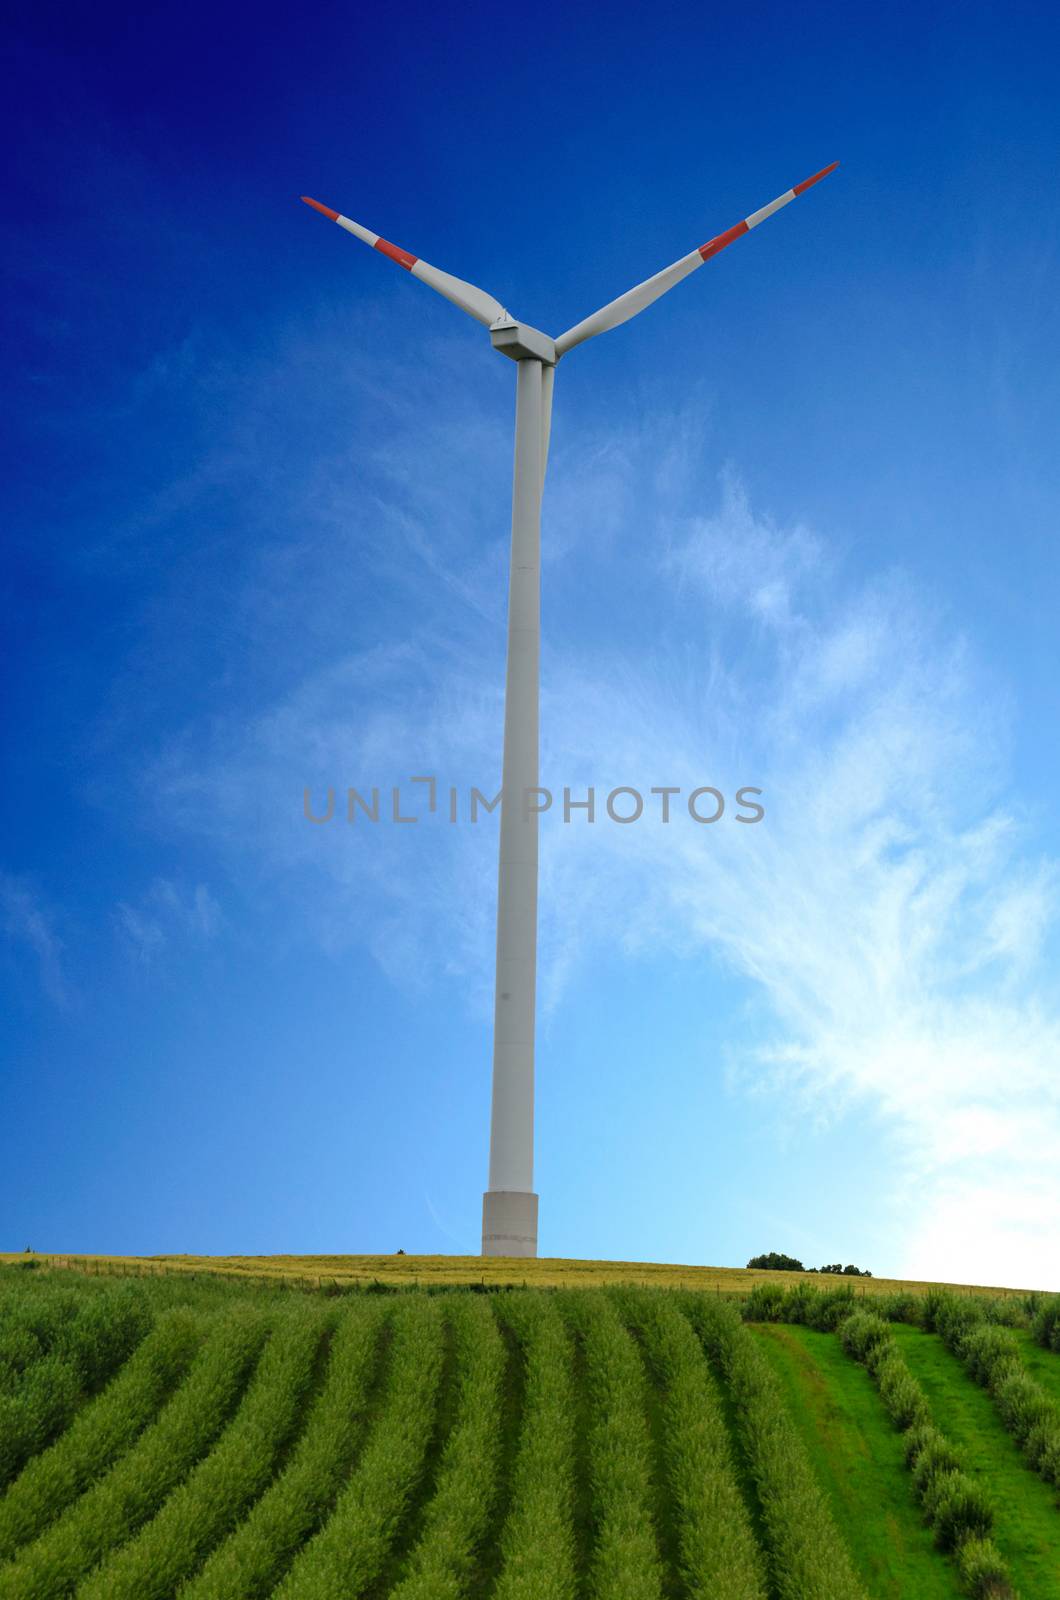 Wind power plant for environmentally friendly power generation.